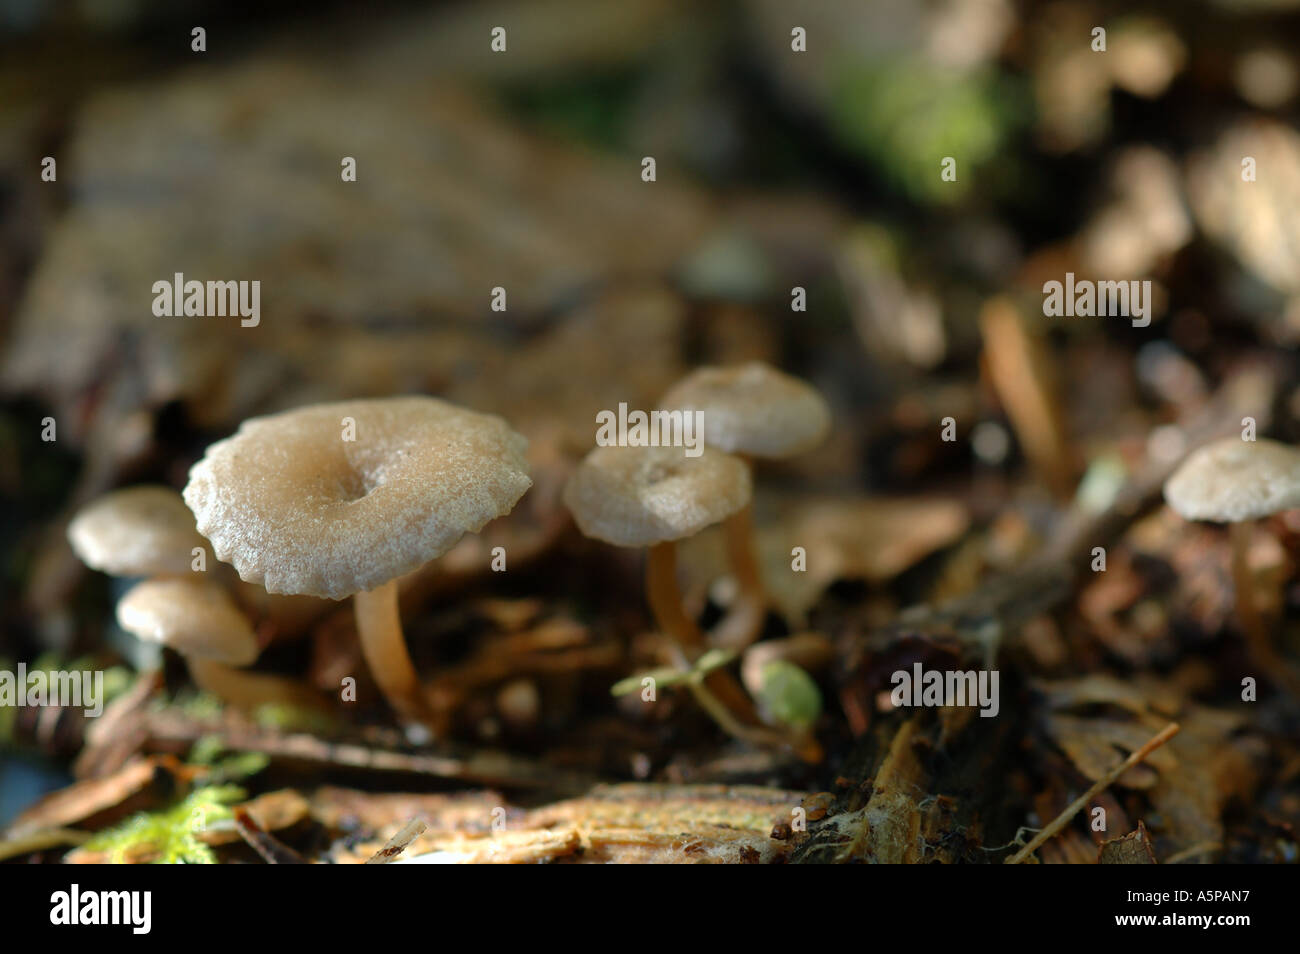 A group of tiny toadstools ( fungus , mushrooms ) growing on the ground in the forest . Wide yellowish caps on short thin stems Stock Photo